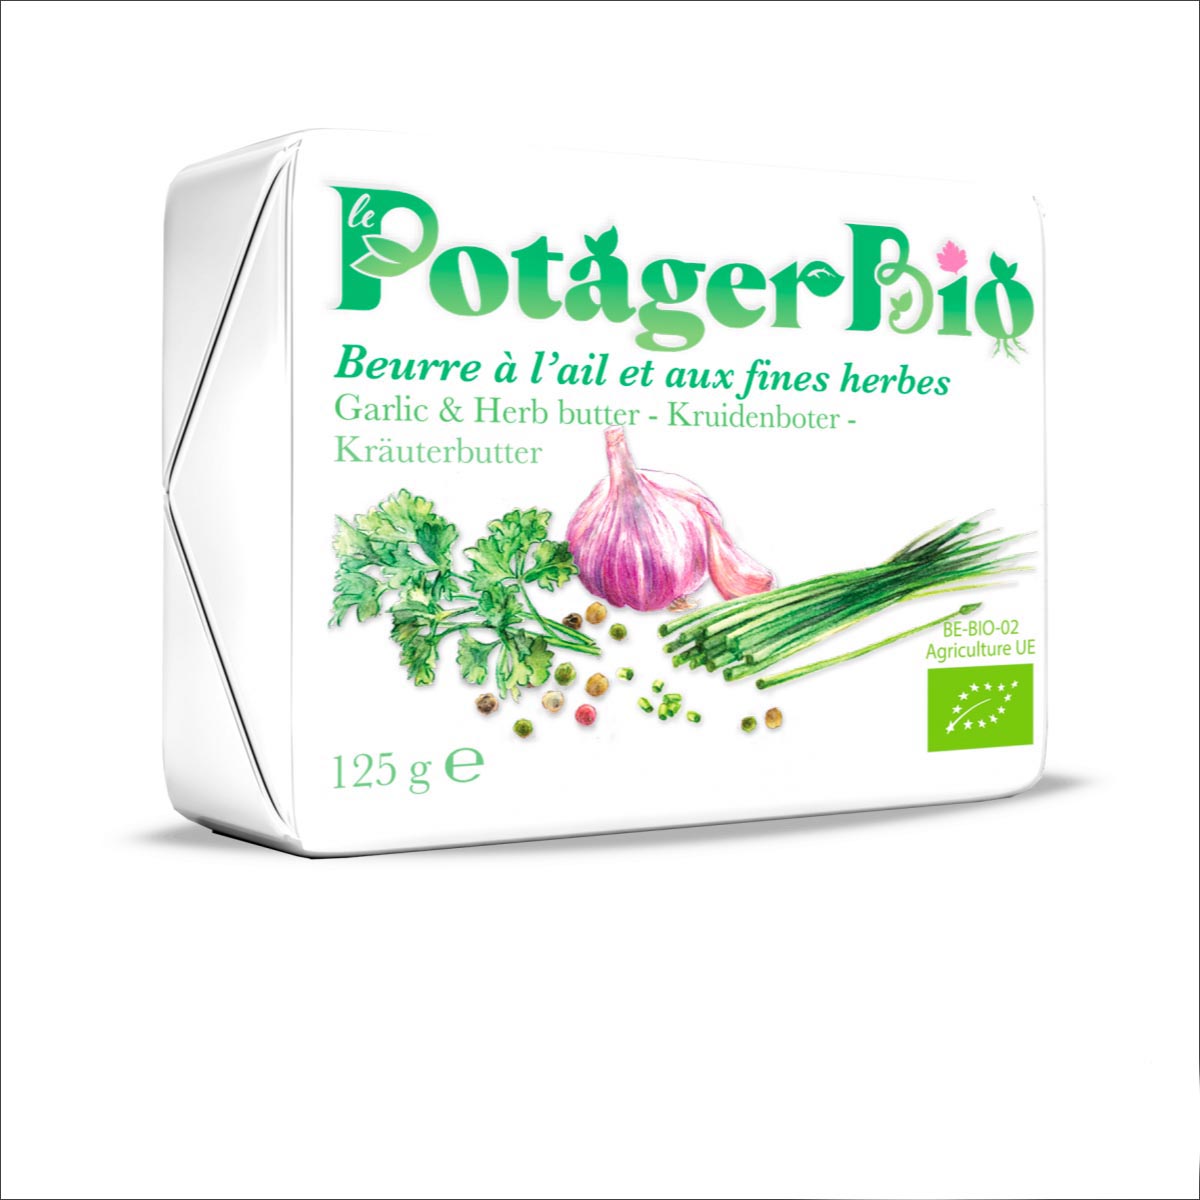 Le Potager Bio butter packaging